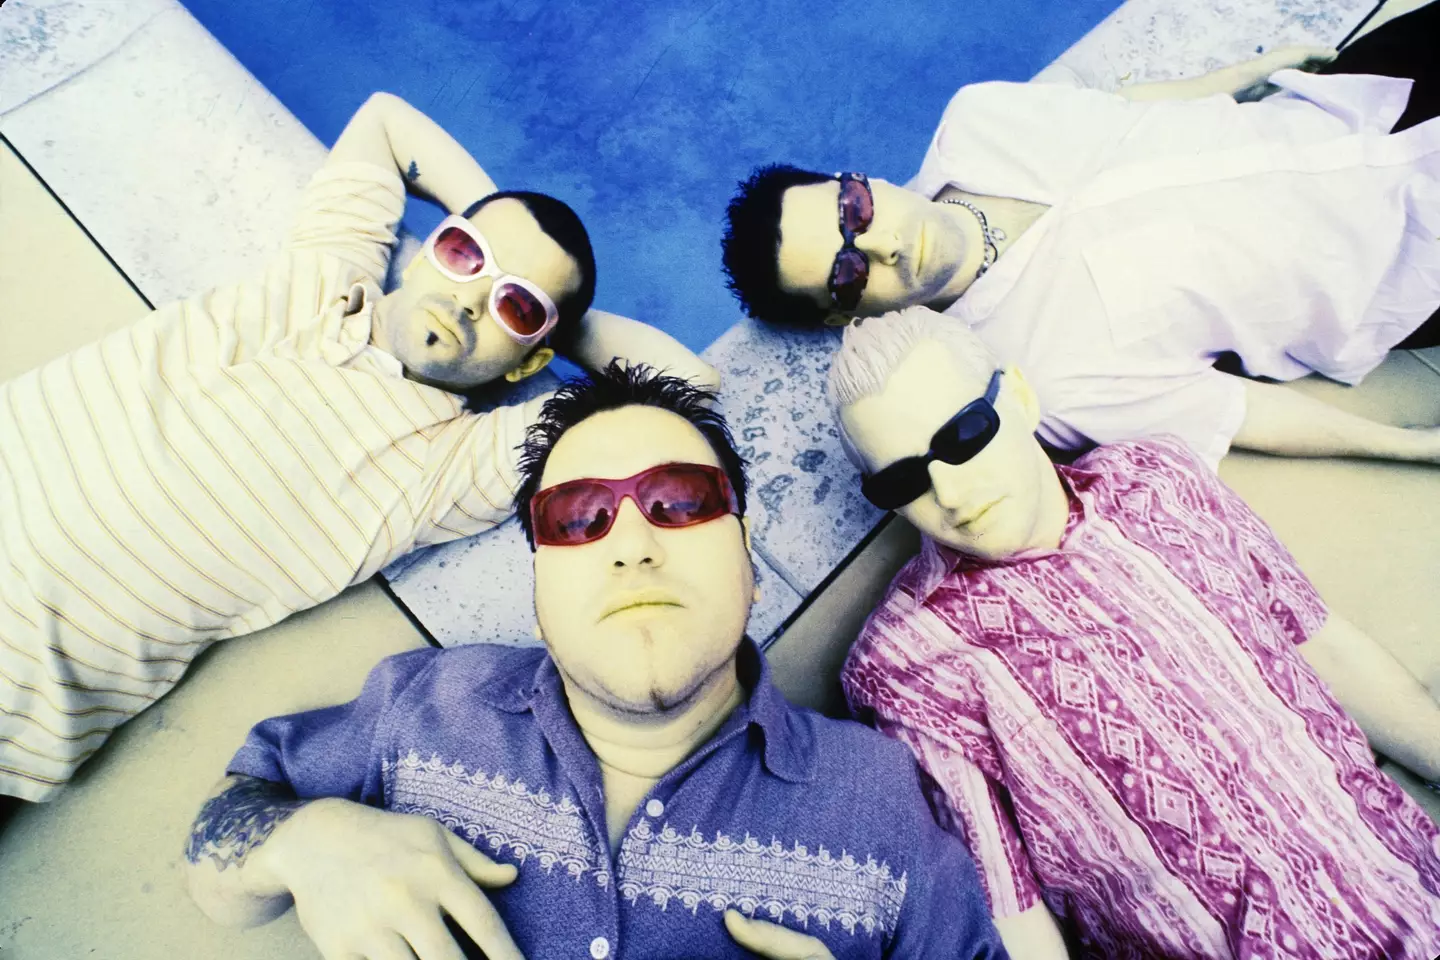 Smash Mouth used to read through the letters on tour.